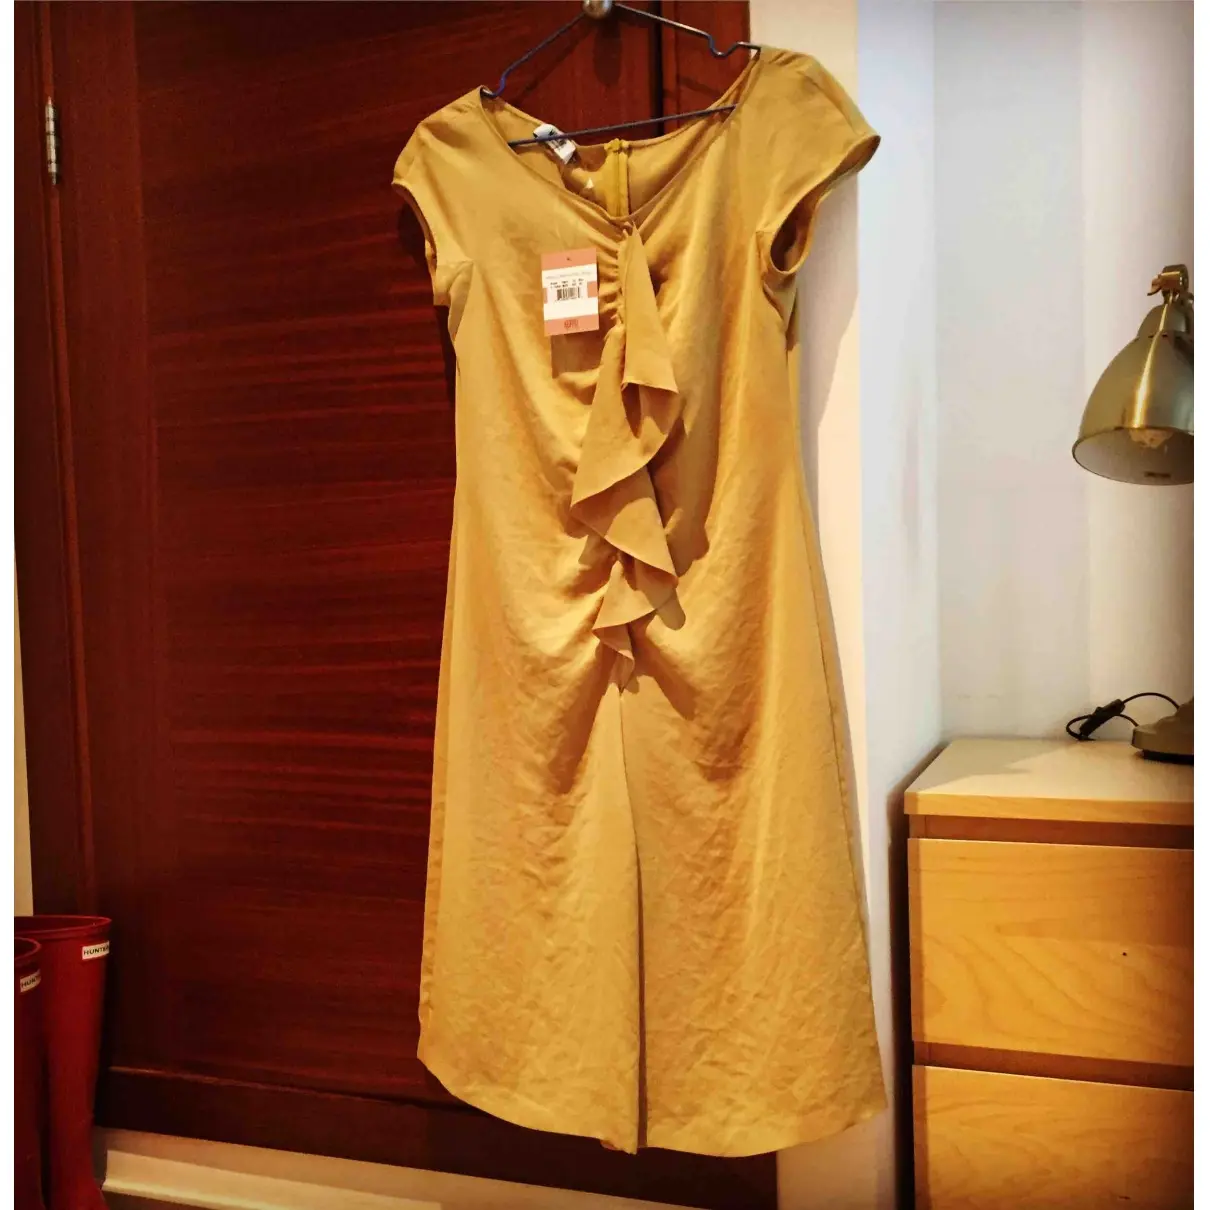 Moschino Cheap And Chic Mid-length dress for sale